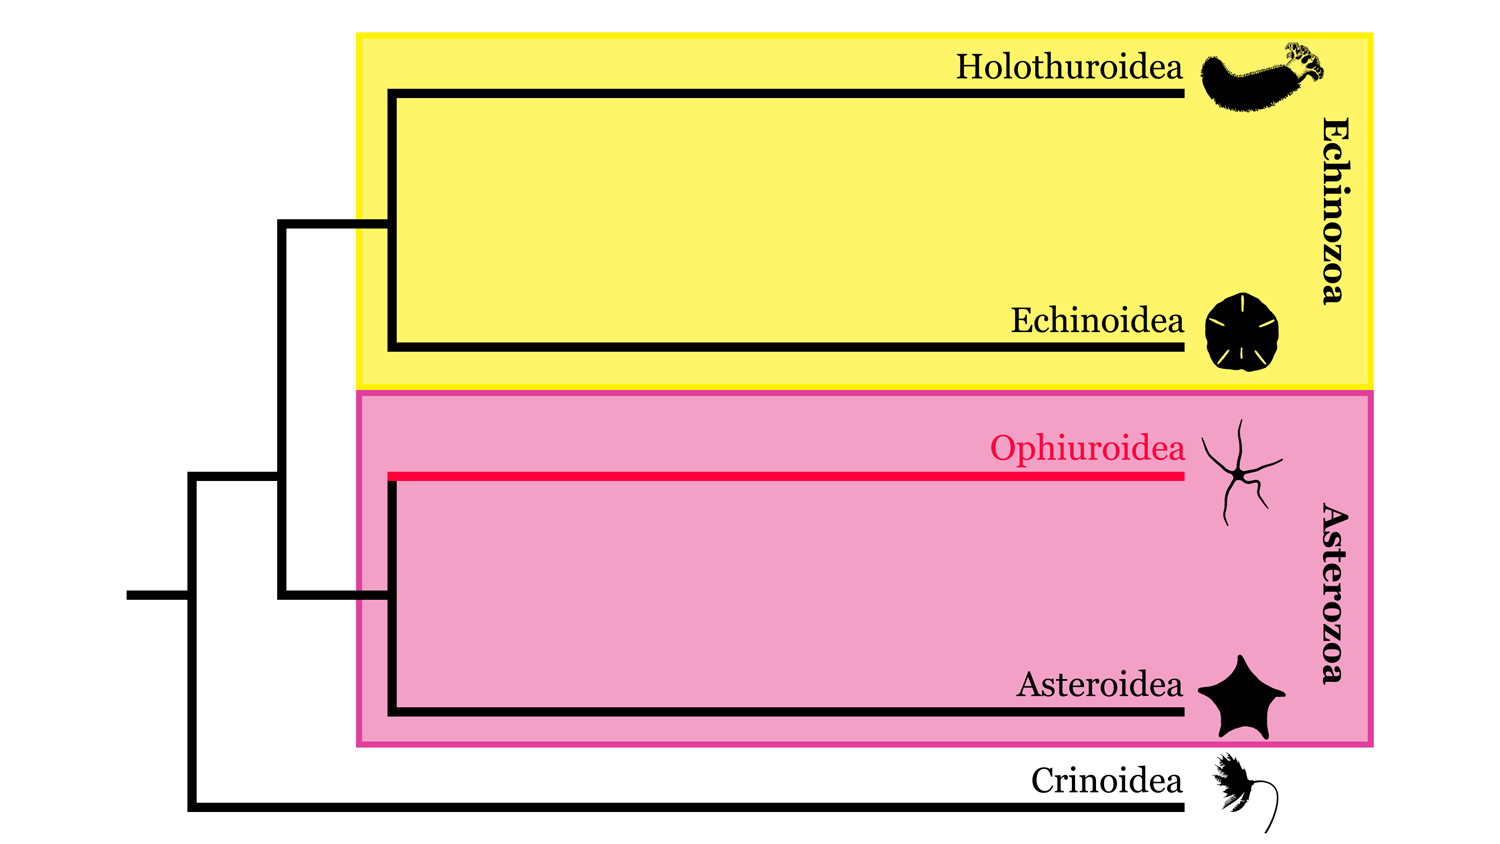 Image of Echinodermata phylogeny, highlighting where Ophiuroidea sits